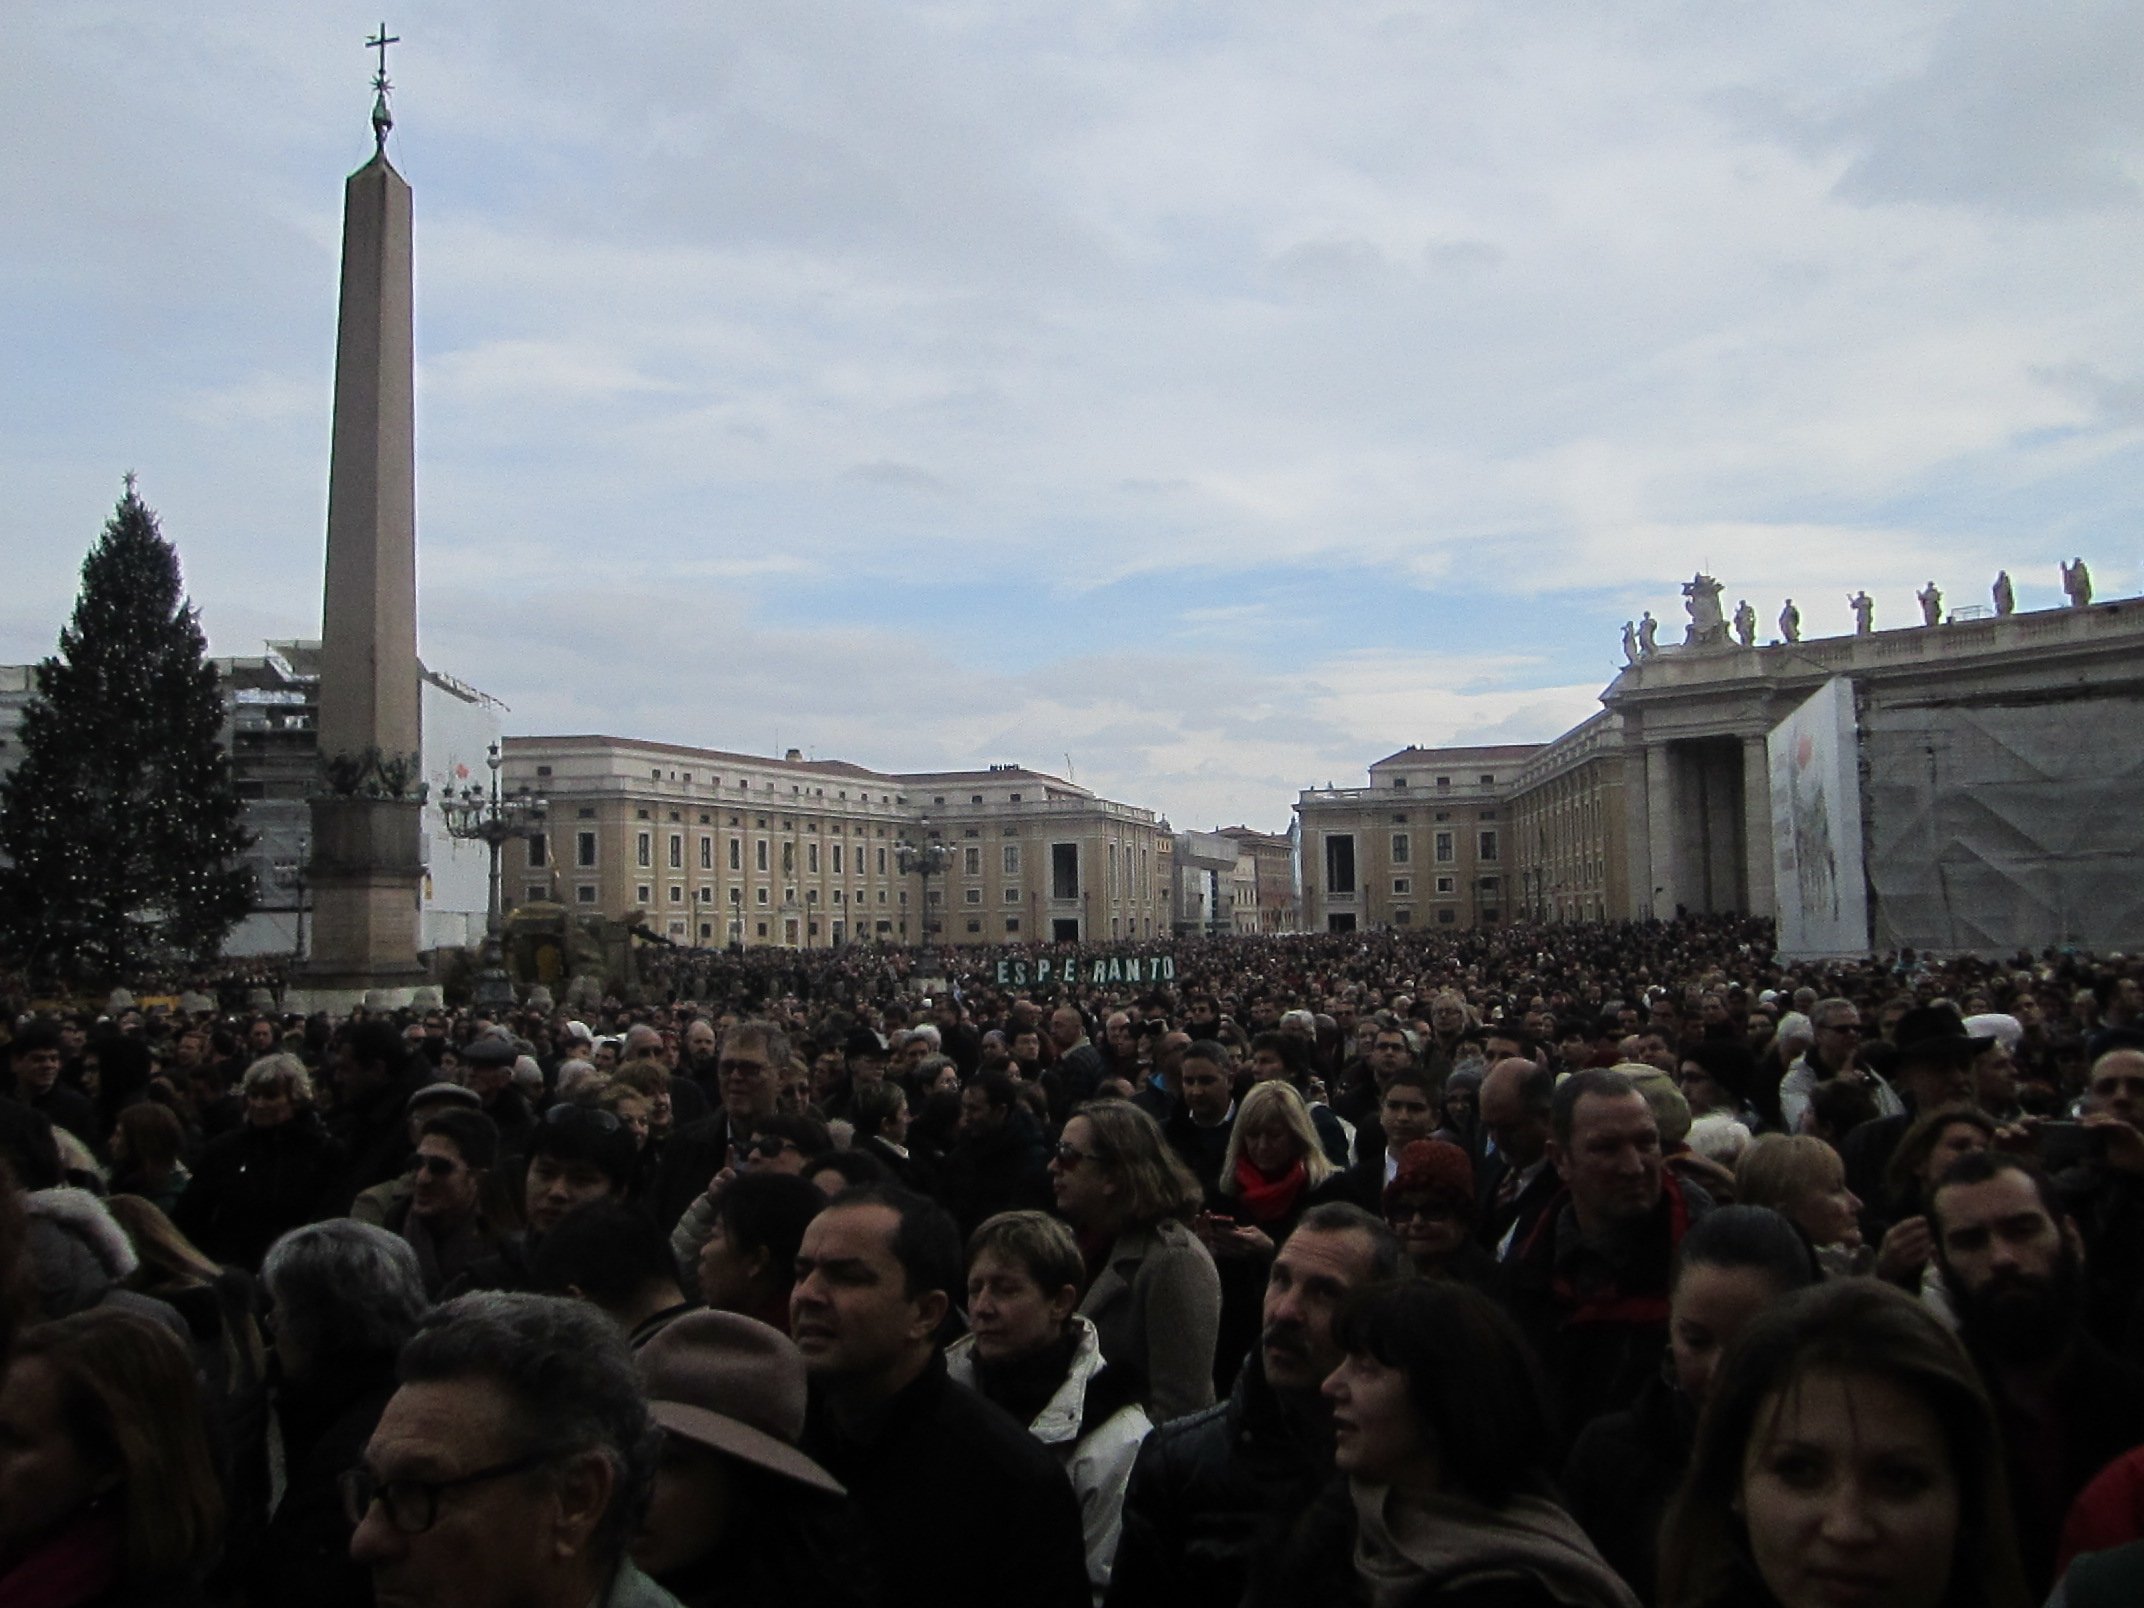 St. Peter's Square on Christmas Day